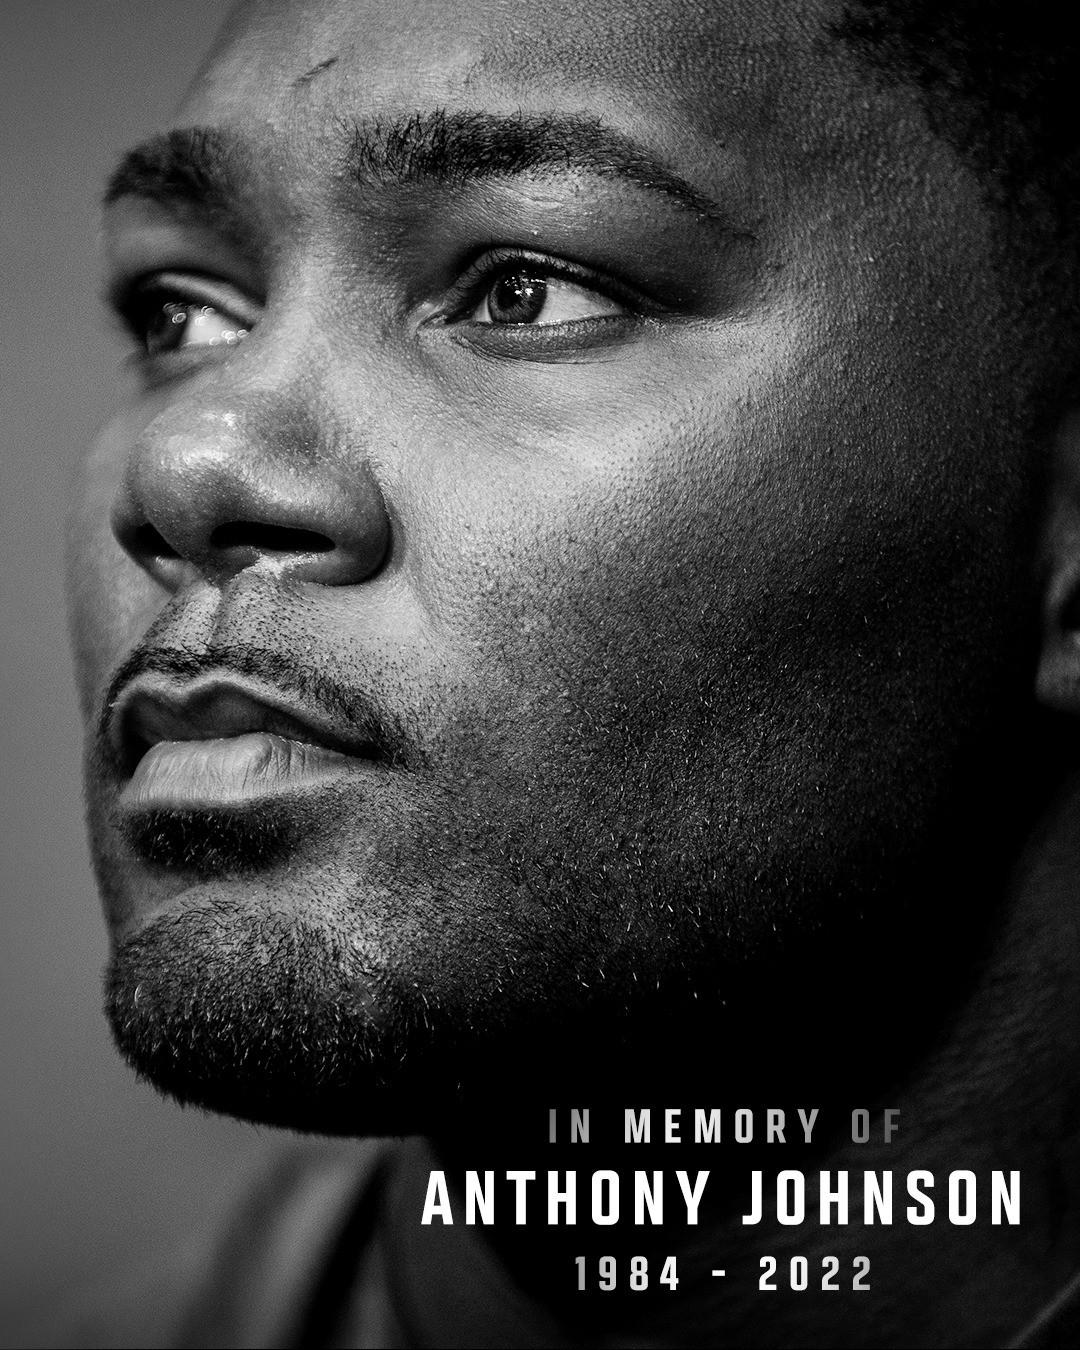 UFC - The UFC family sends its sincerest condolences to the family and friends of Anthony “Rumble” J